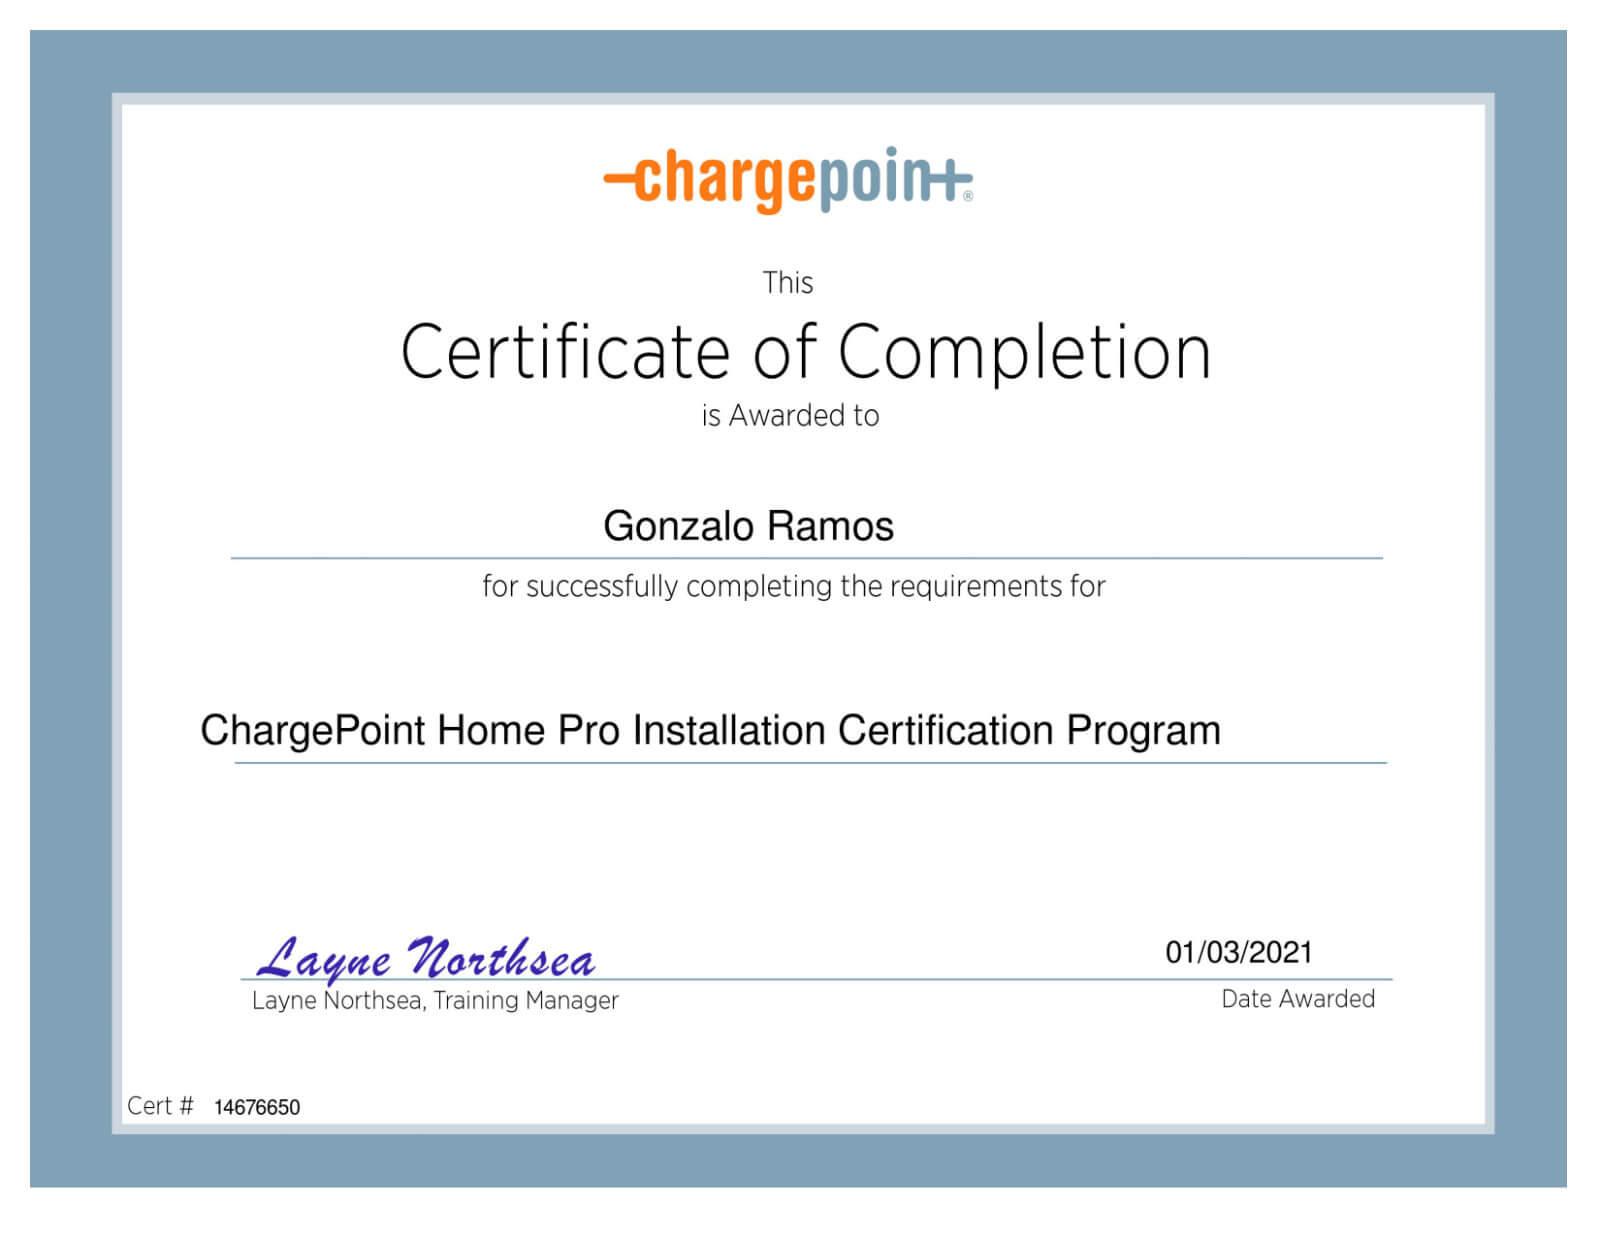 Chargepoint Home Pro Installation Certification Program